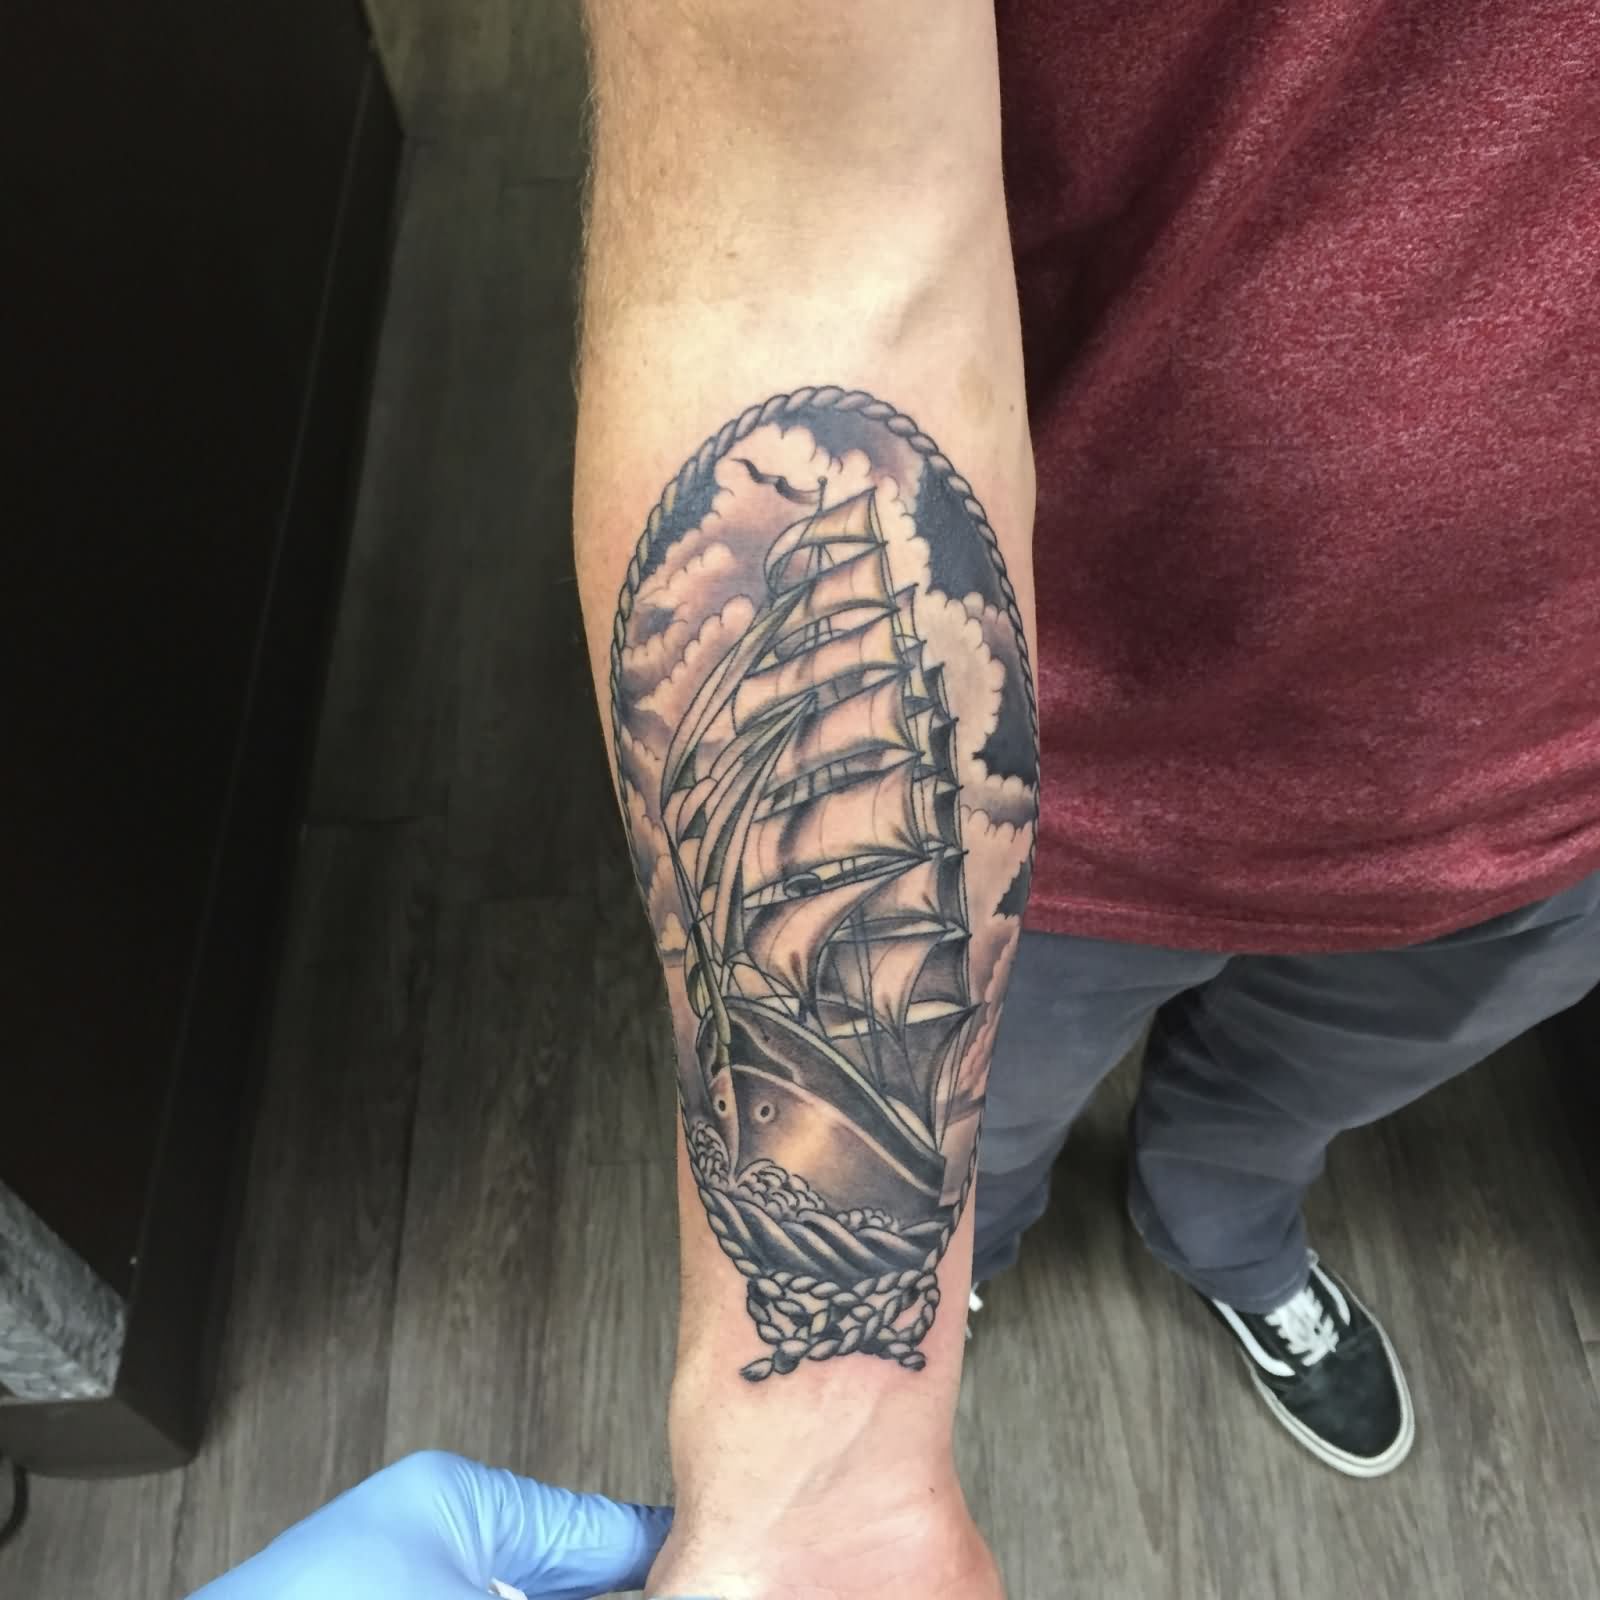 Black Ink Ship In Frame Tattoo On Right Forearm By Daniel Troyer